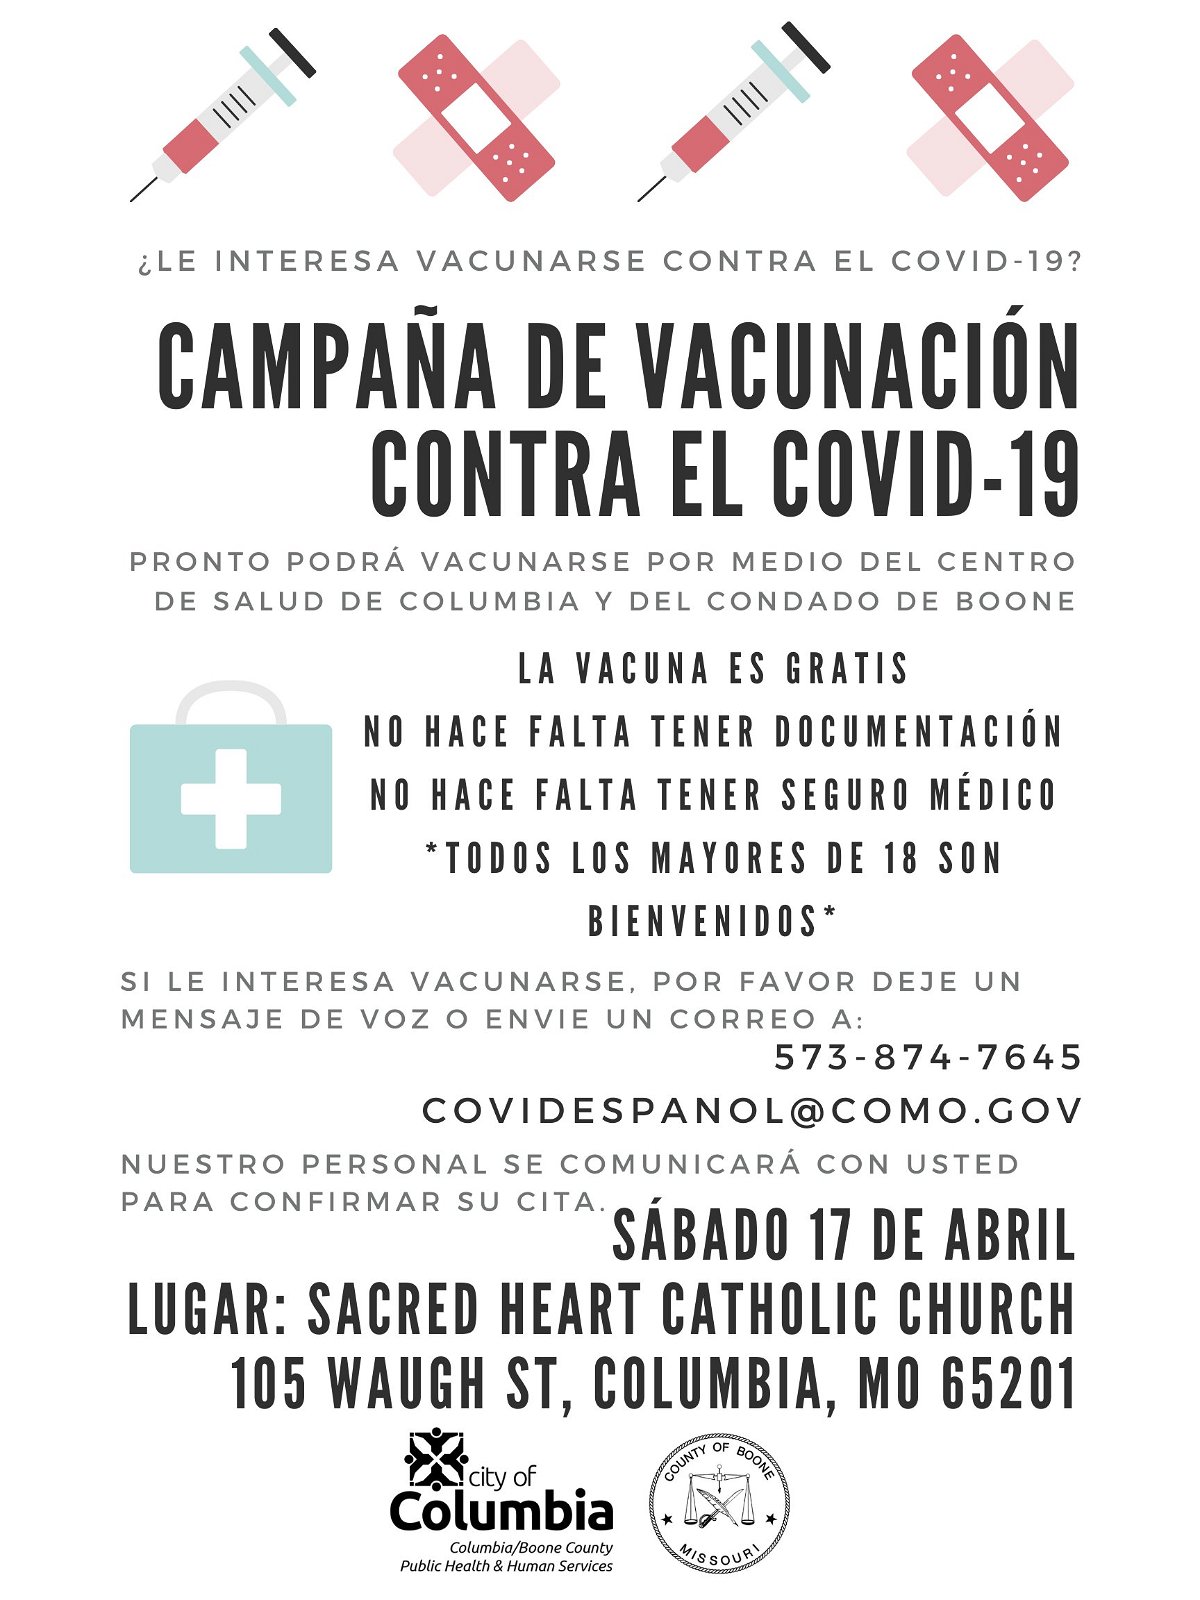 Columbia/Boone County Public Health and Human Services is hosting a COVID-19 vaccination clinic primarily for Spanish speaking community members Saturday at Sacred Heart Catholic Church.